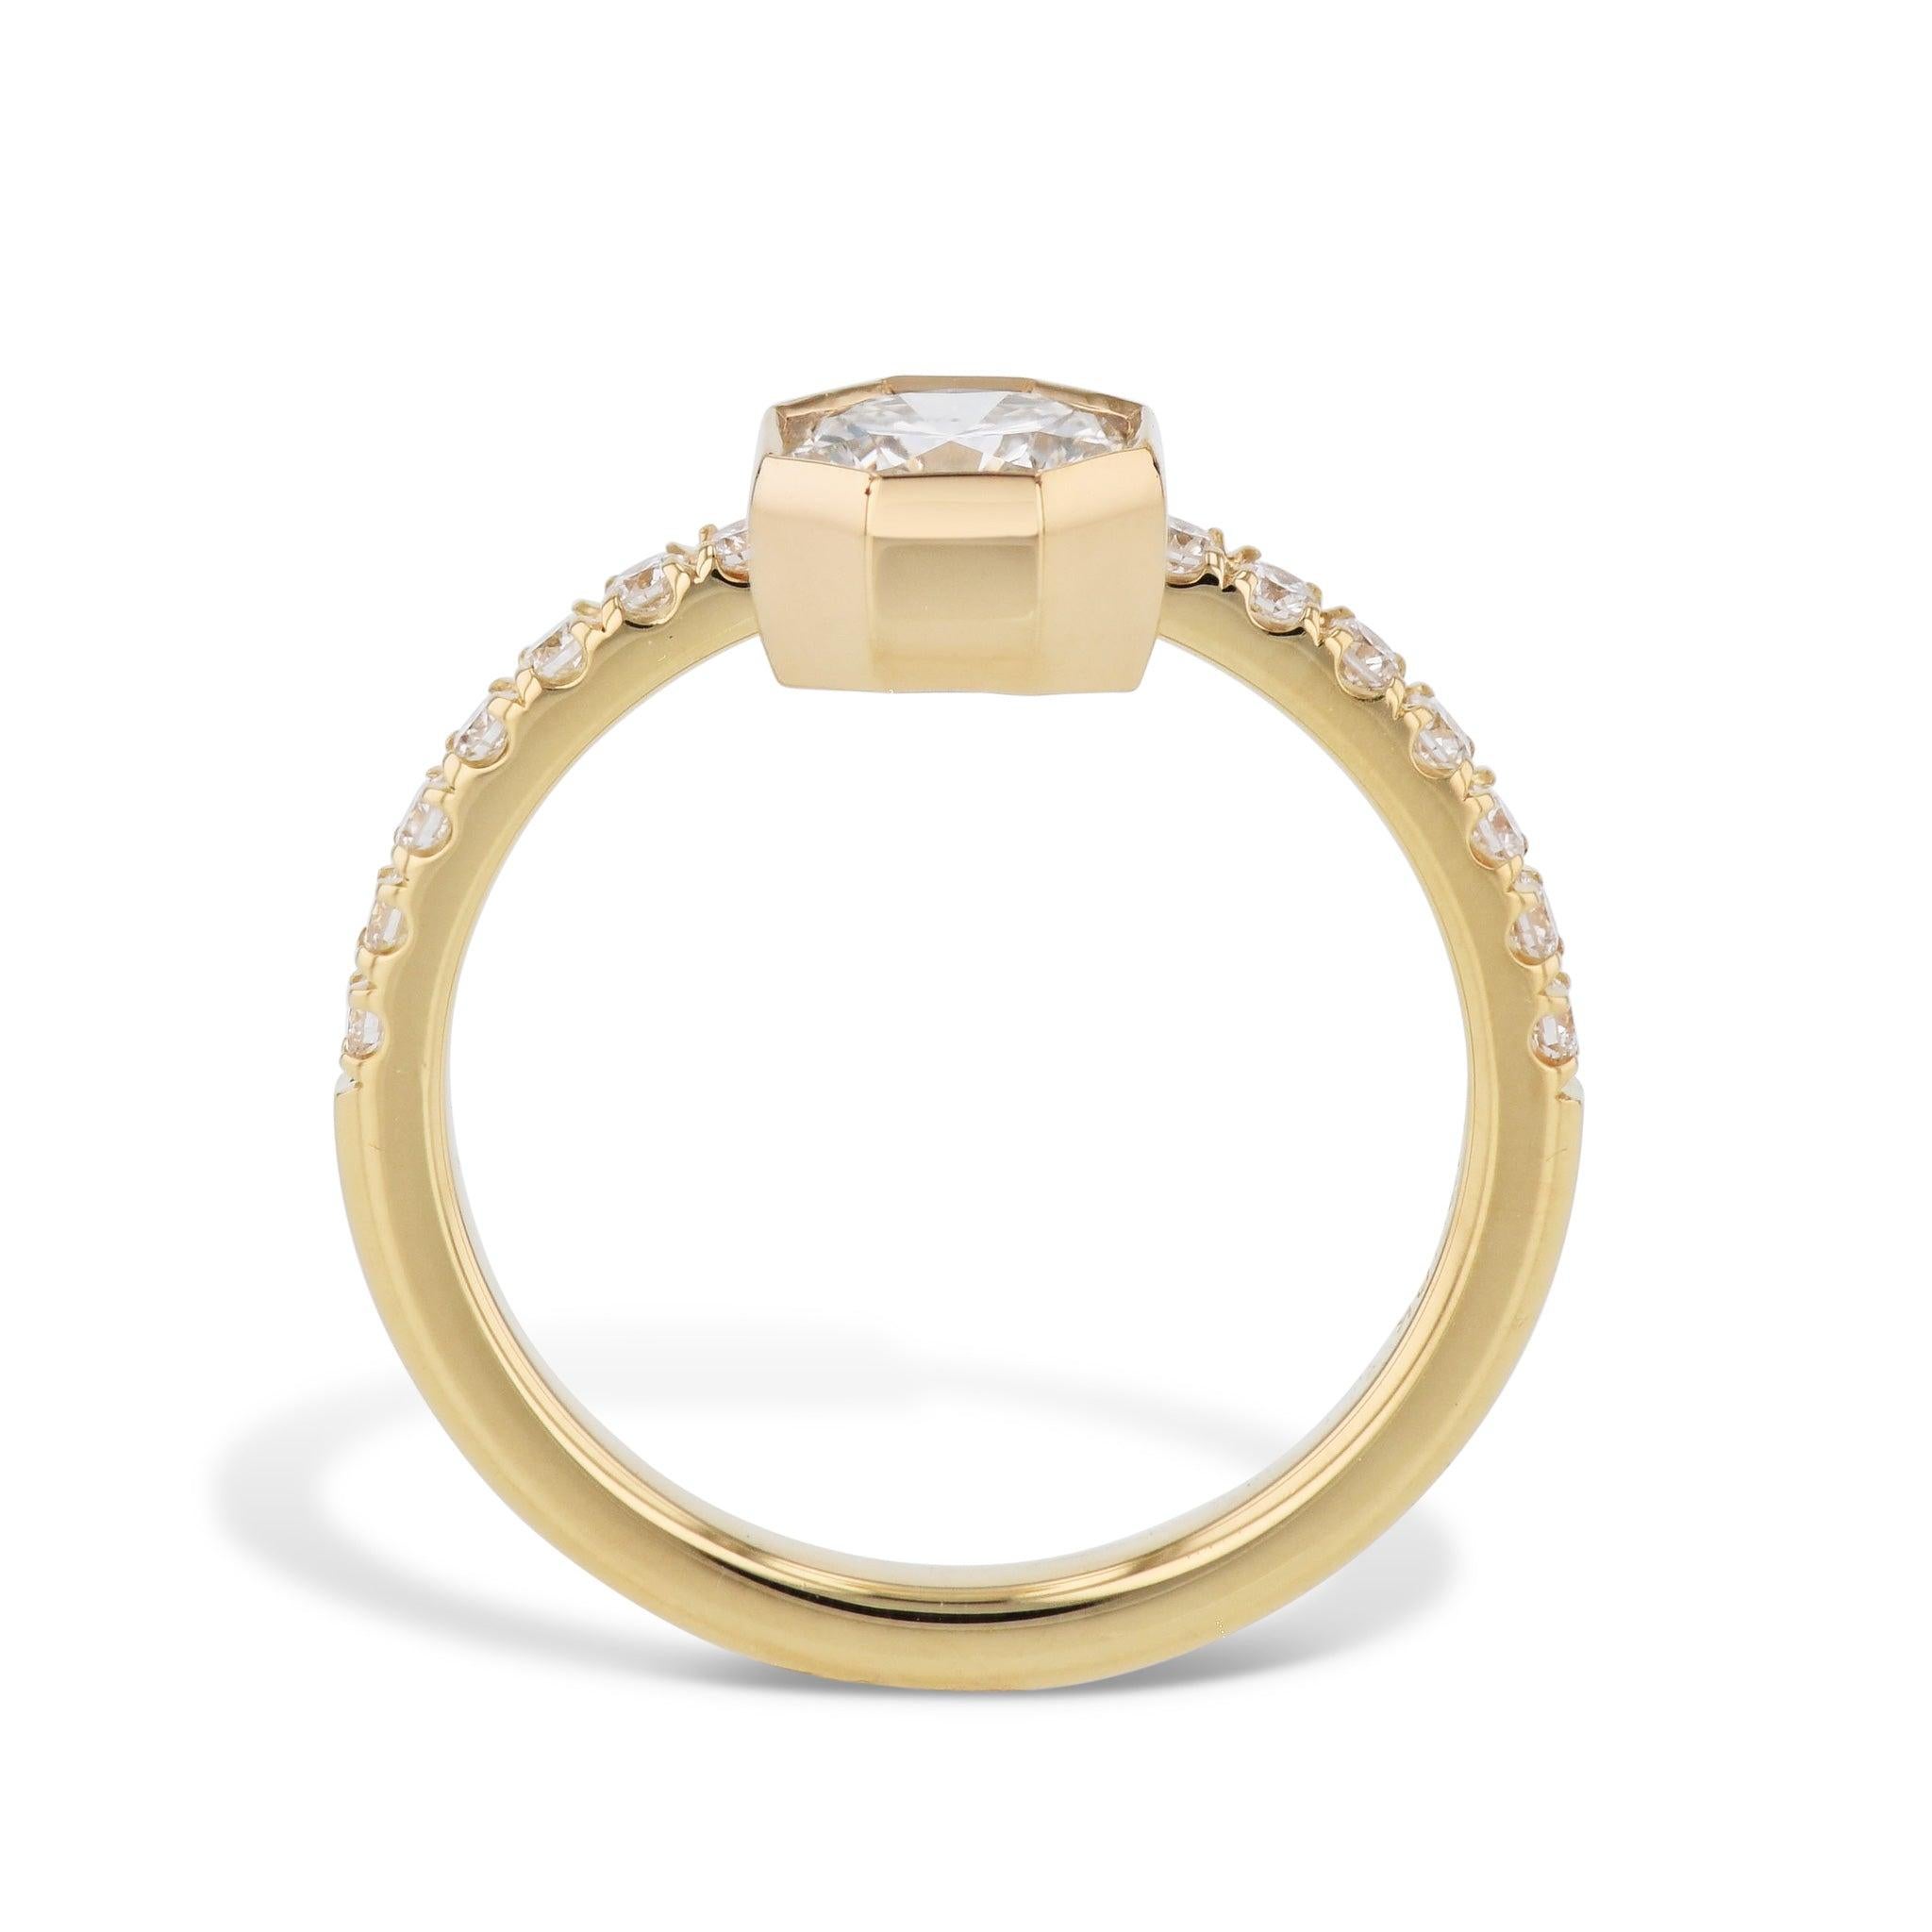 This exquisite Octagonal Bezel Set Diamond Engagement Ring is an exquisite symbol of everlasting love! Handcrafted with 18kt yellow gold, the ring boasts an octagonal diamond and diamond pave. Captivating and timeless, this handmade H&H Collection